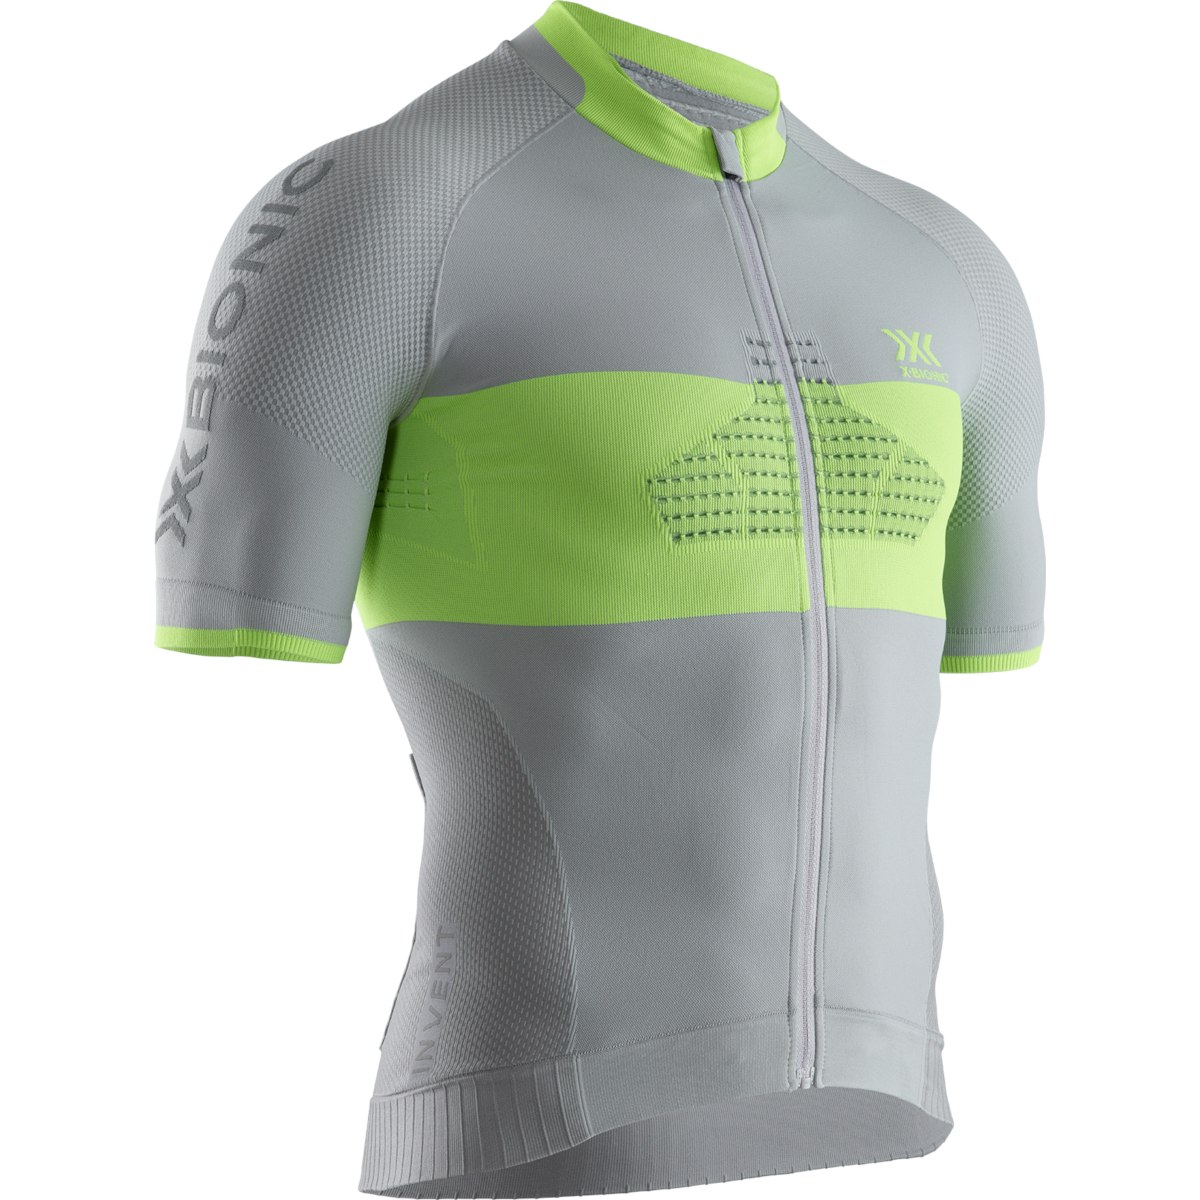 Picture of X-Bionic Invent 4.0 Bike Race Zip Shirt Short Sleeves for Men - dolomite grey/phyton yellow